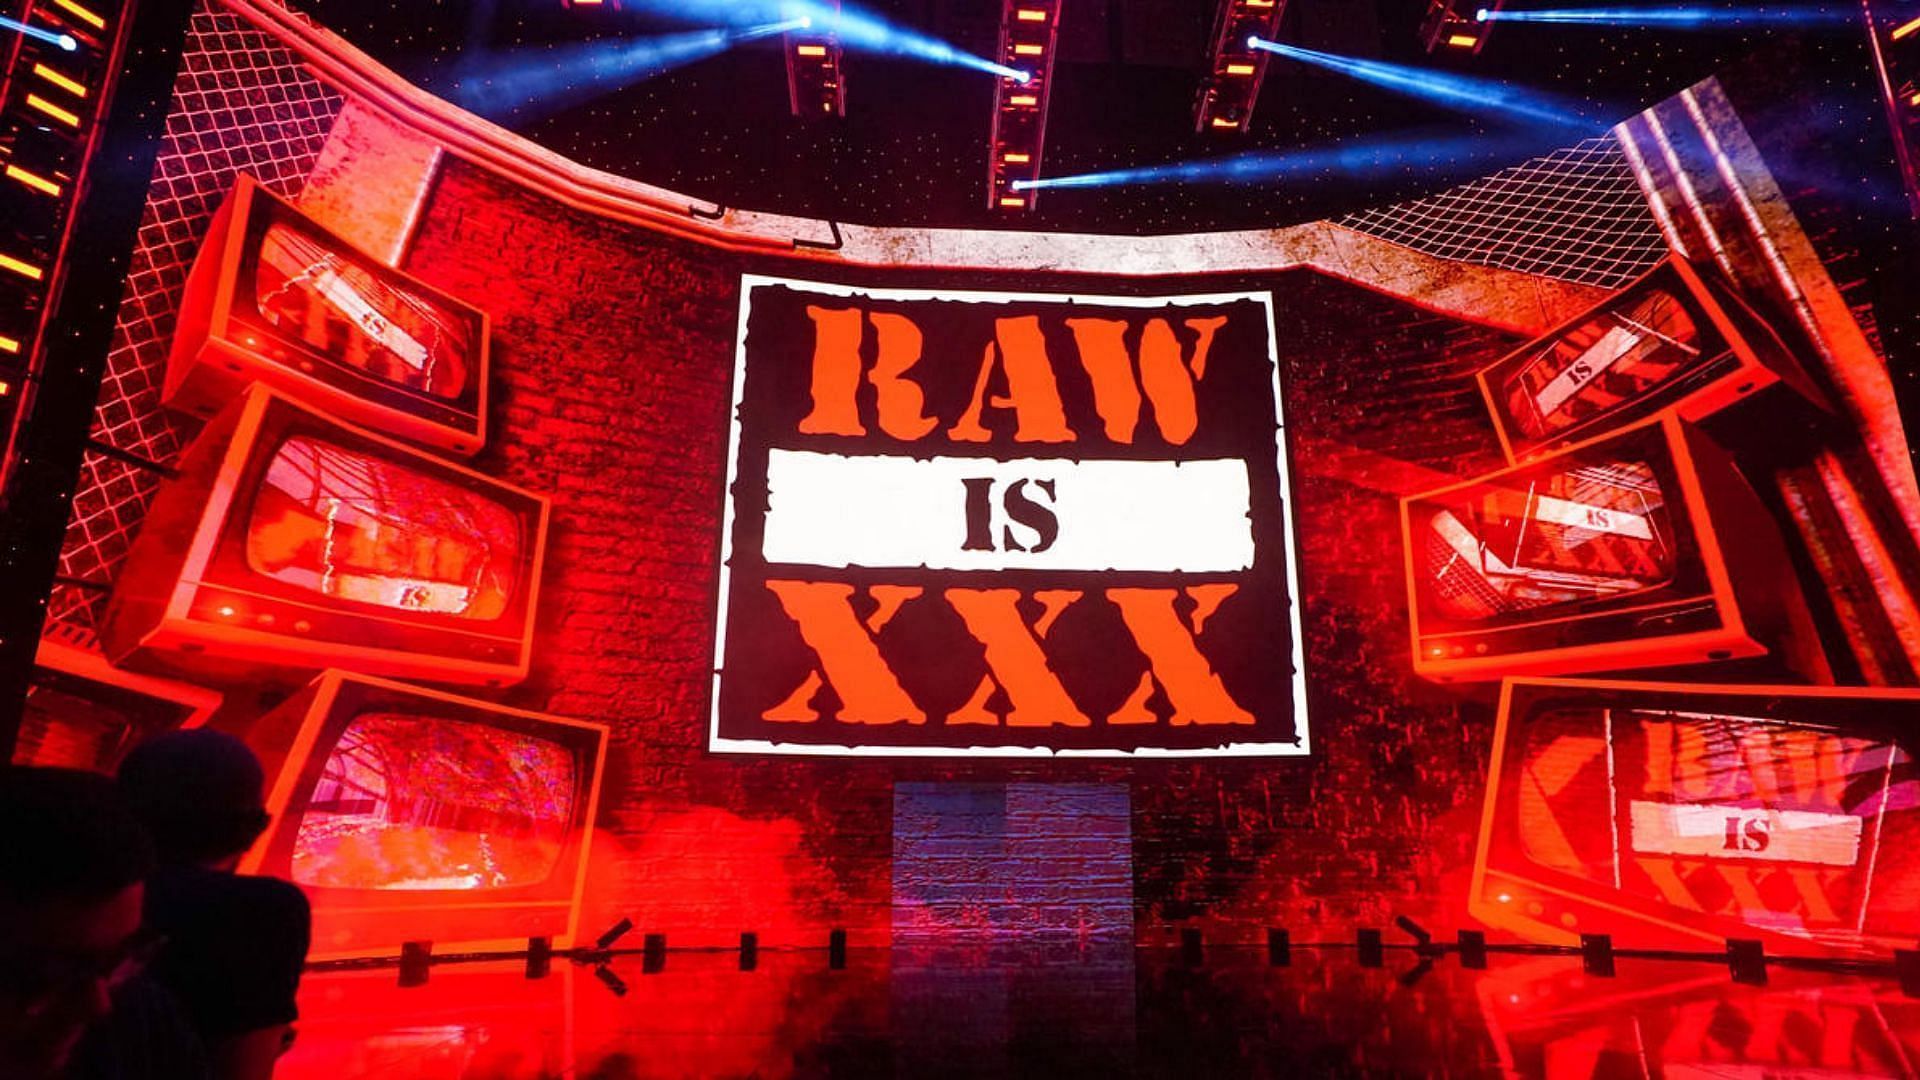 RAW is XXX had a bunch of WWE Hall of Famers on the show, but missed one. 